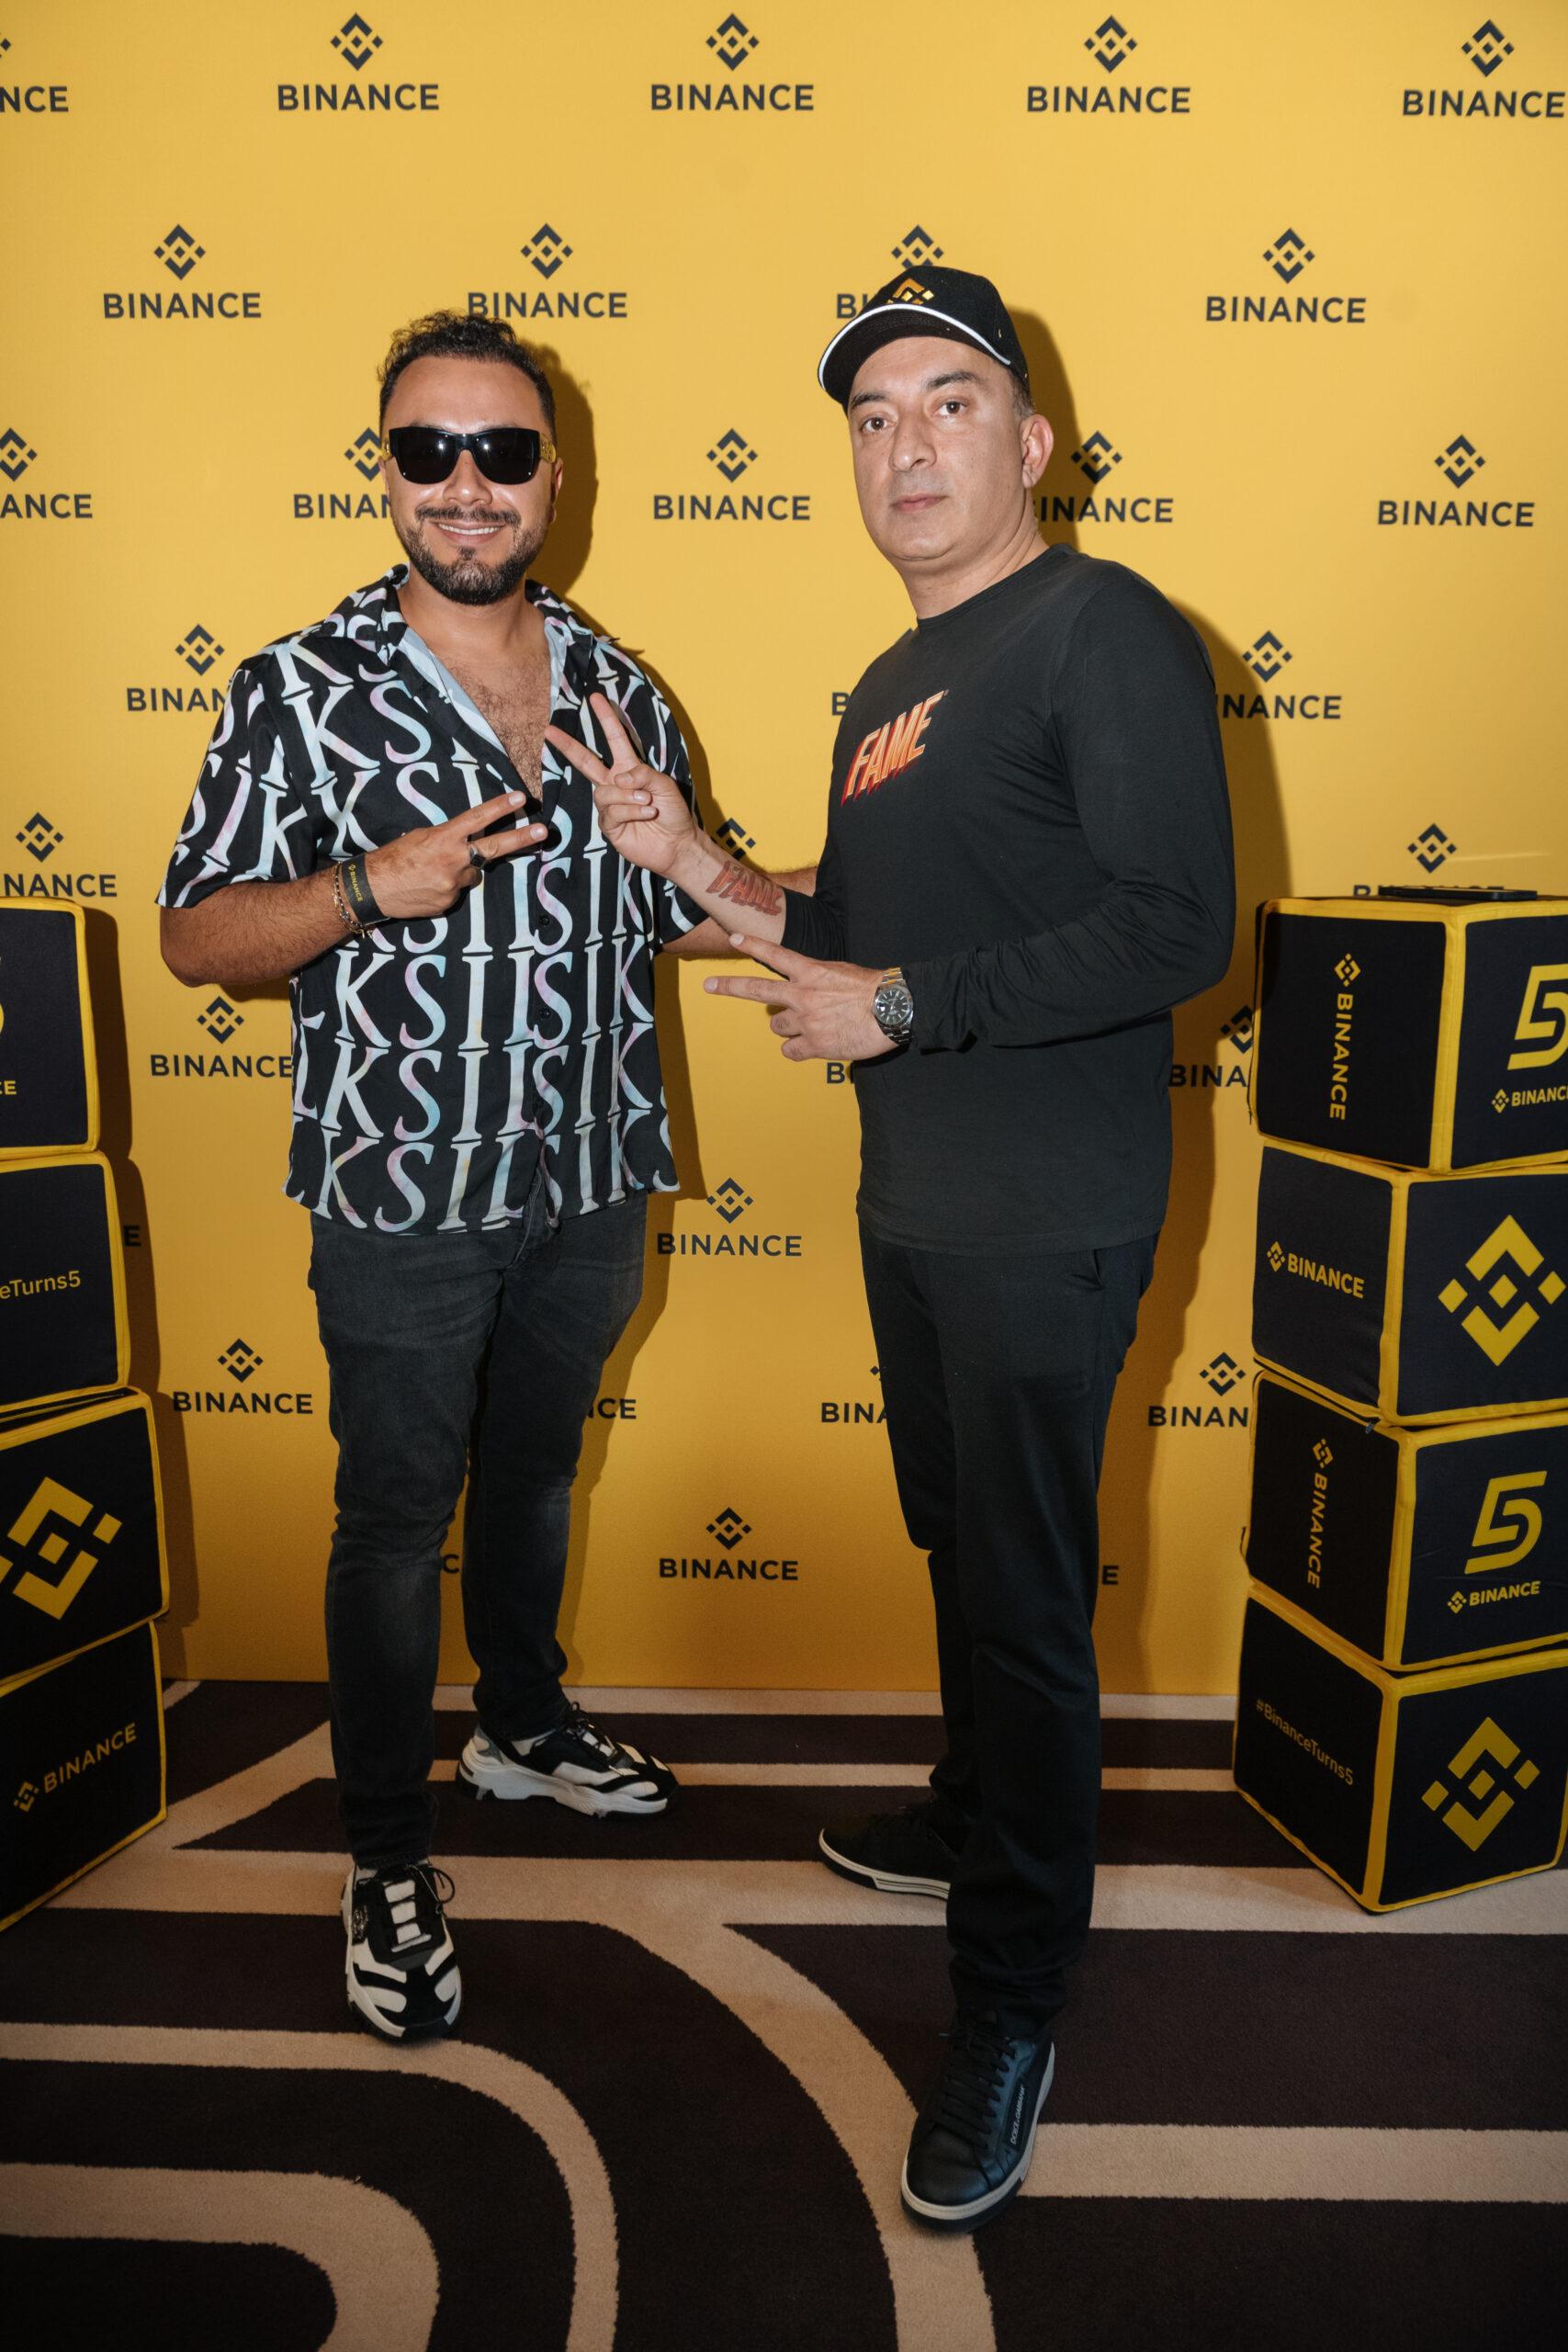 Top Crypto Influencer Andres Meneses Celebrates Binance's 5th Anniversary, Paris Hilton Approves!